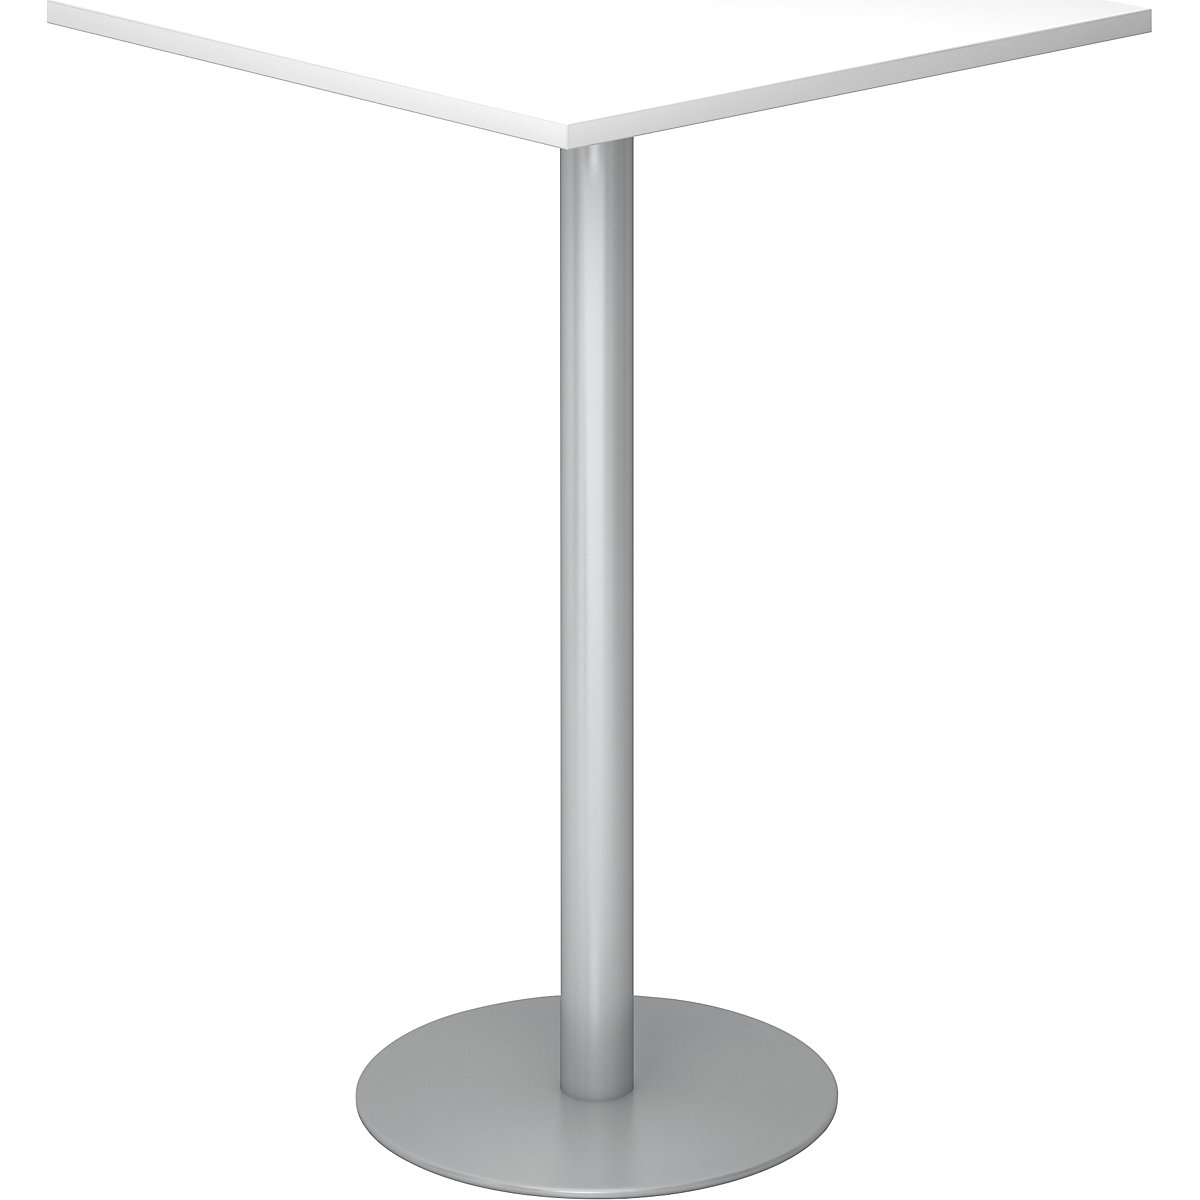 Pedestal table, LxW 800 x 800 mm, 1116 mm high, silver frame, tabletop in white-5